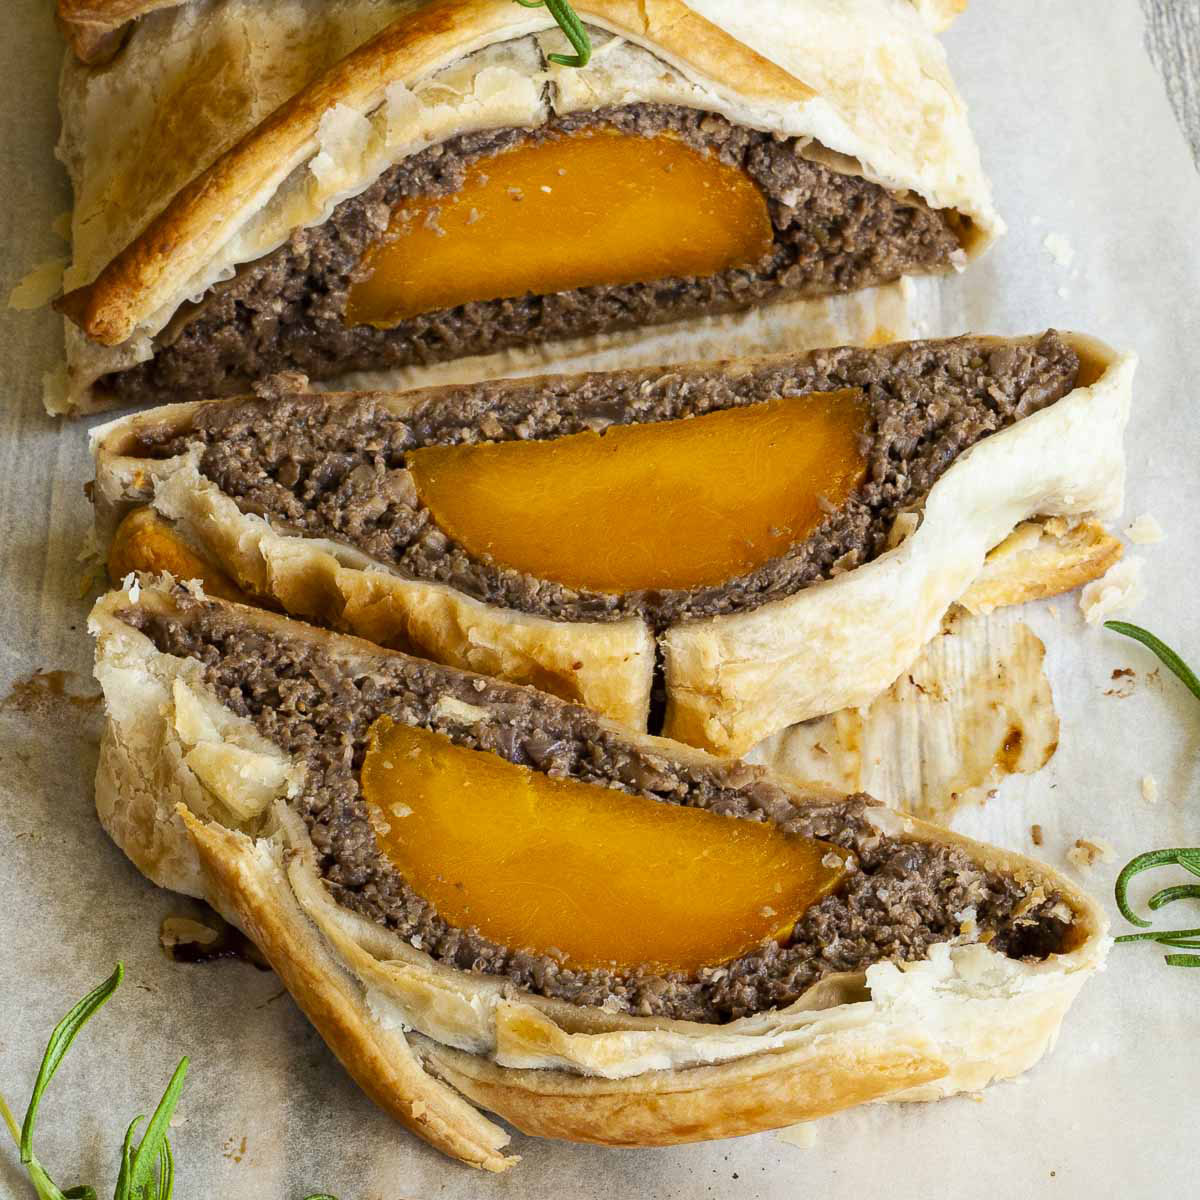 2 slices of vegan wellington on the side. Yellow squash with brown puree around wrapped in a pastry shell. Green herbs are around.